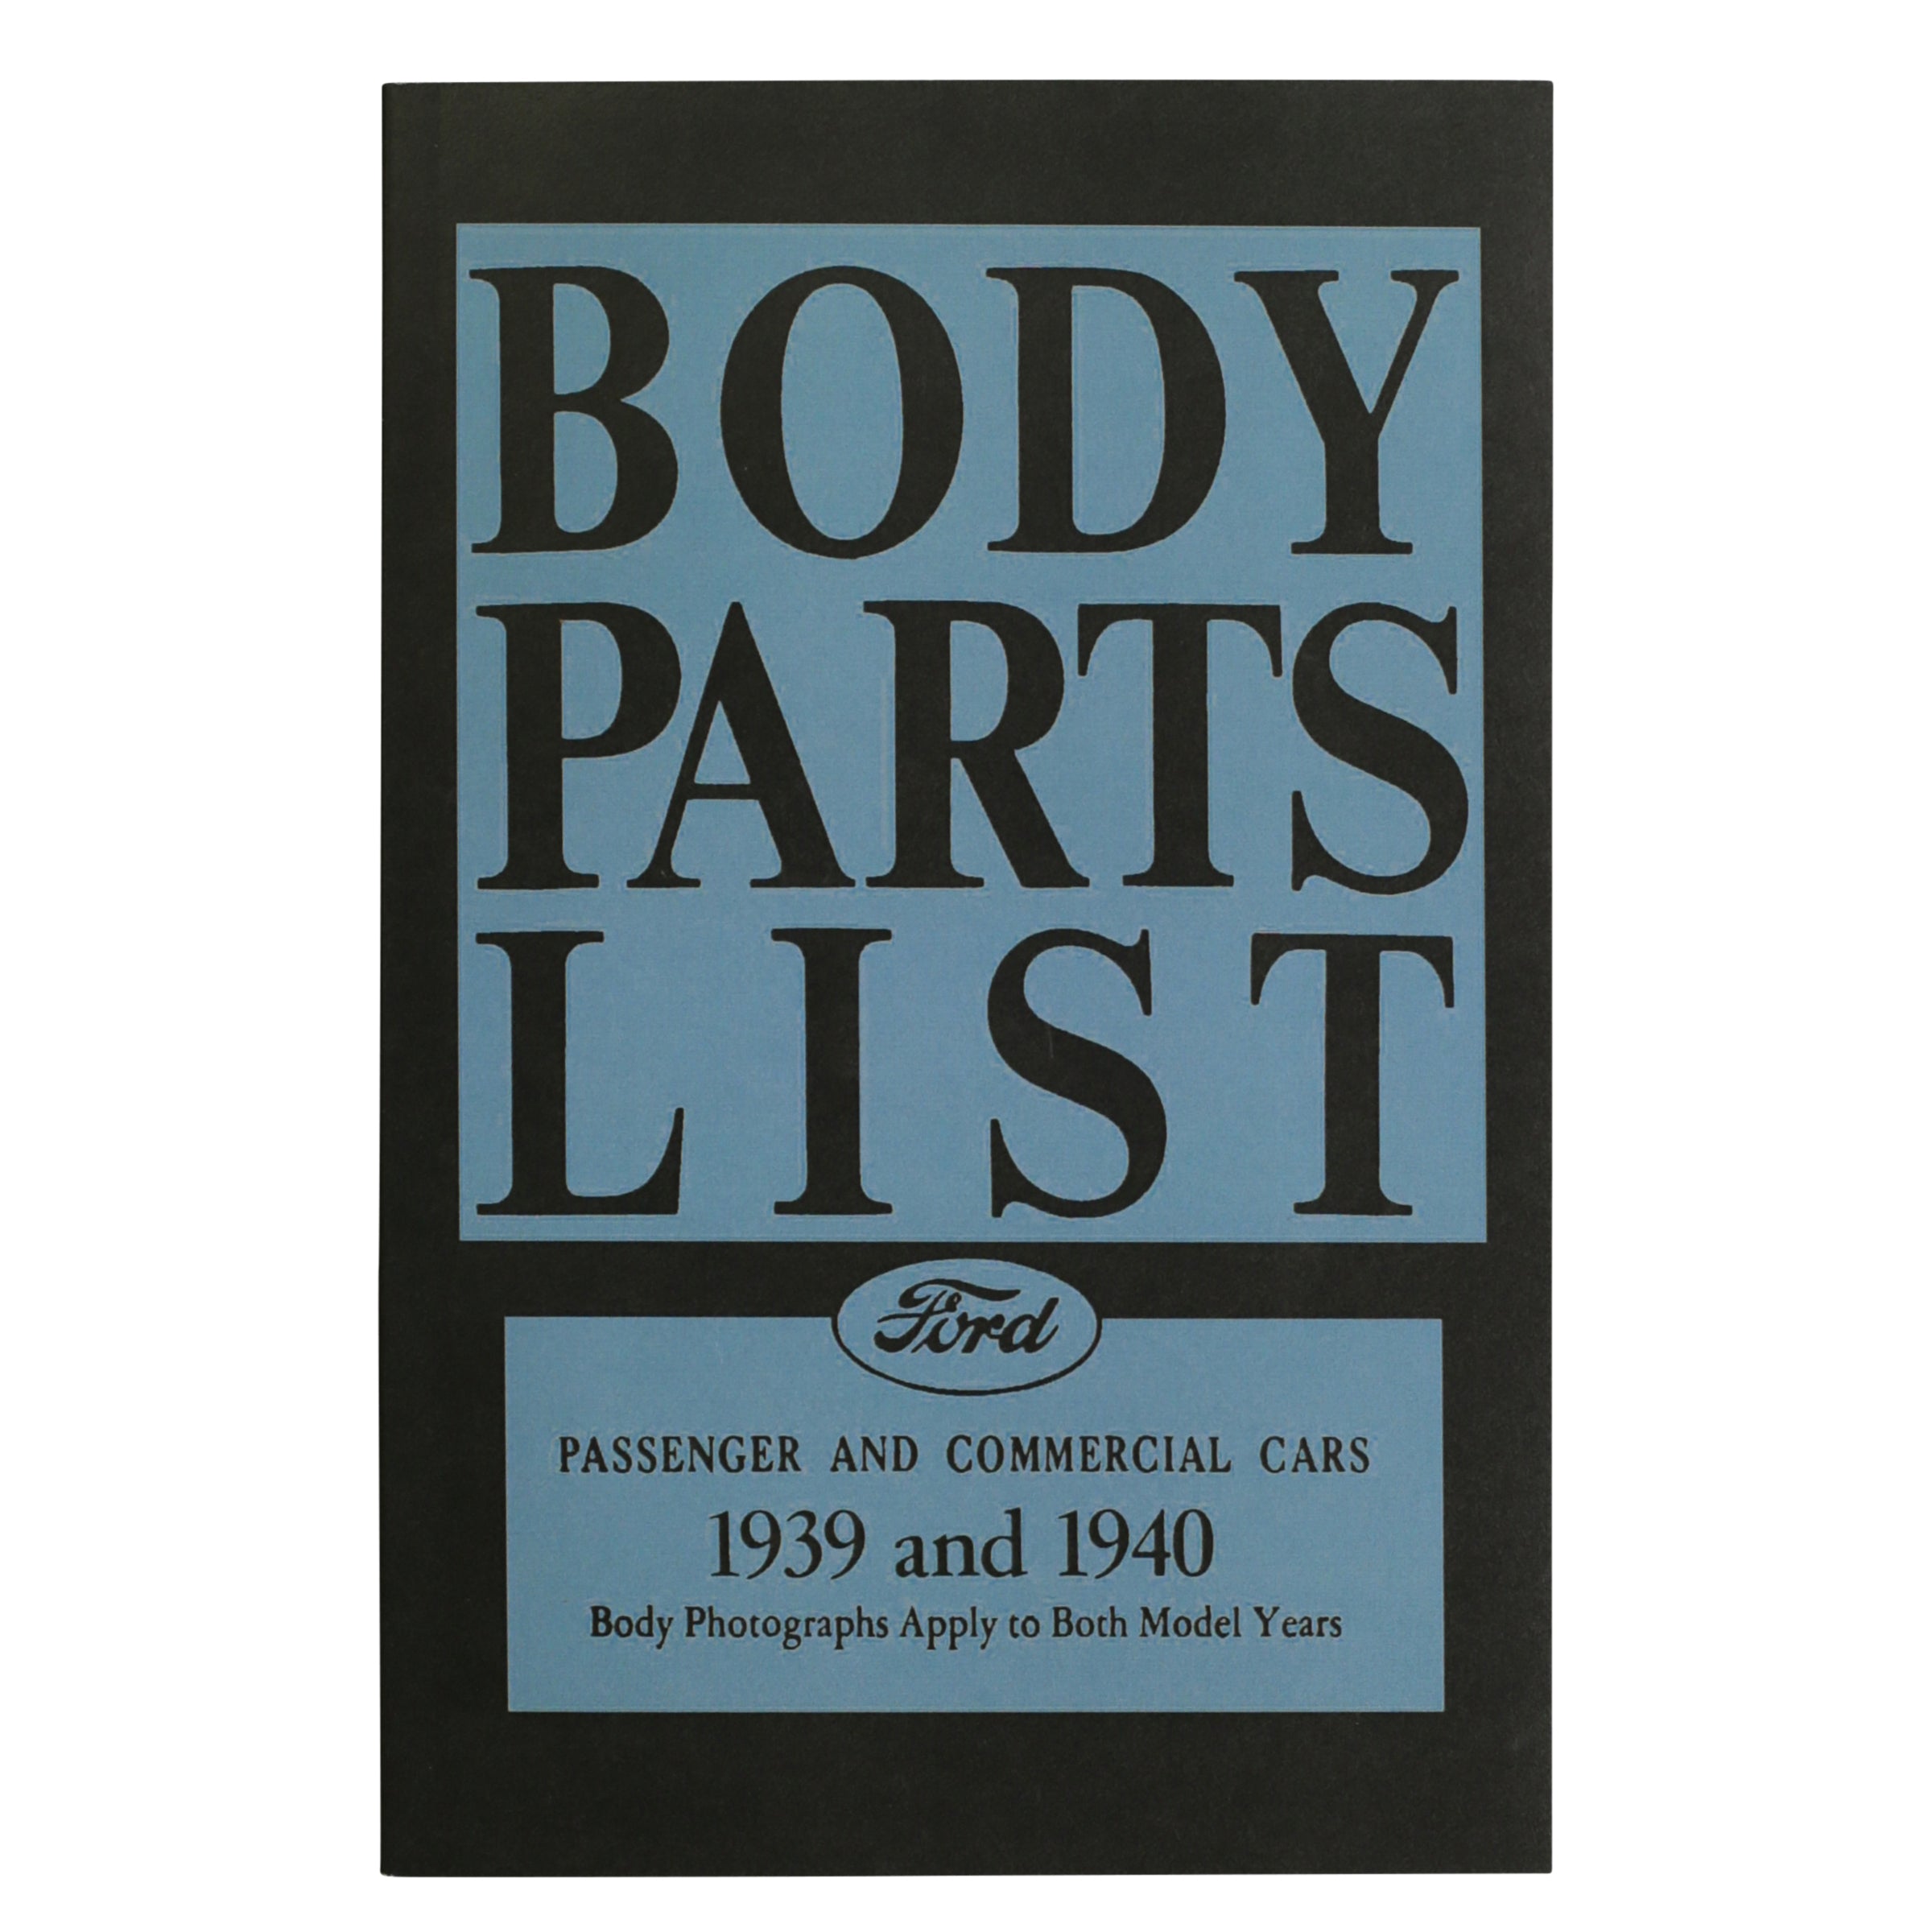 Ford Body Parts List • 1939-40 Ford